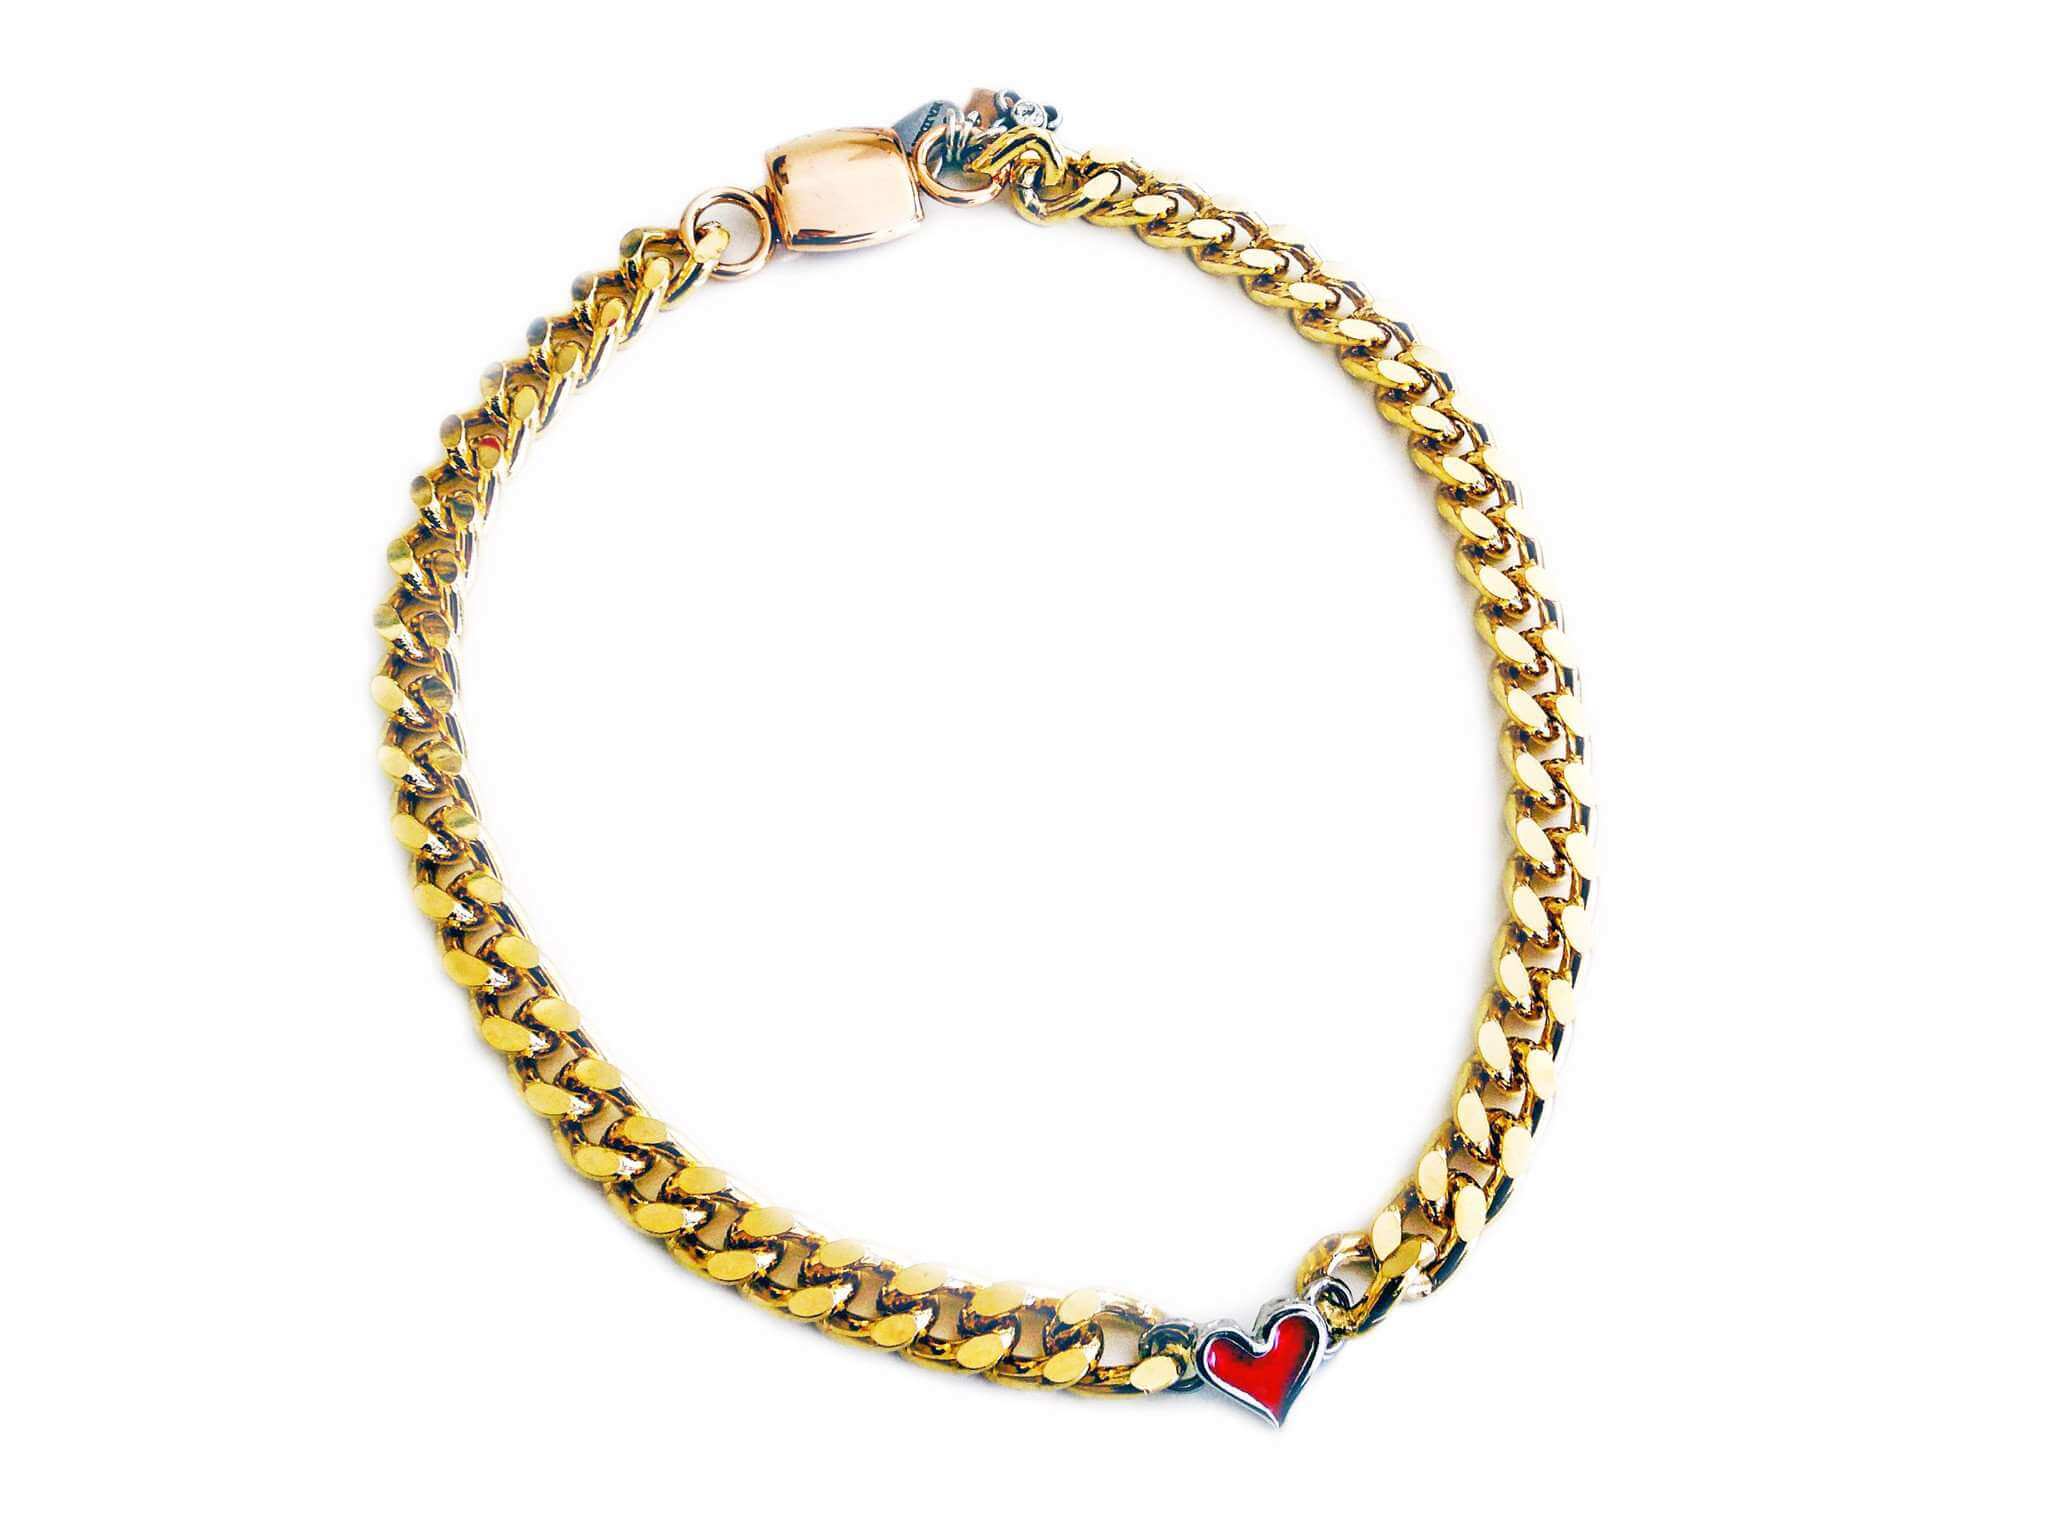 Gold chain necklace with red heart shaped charm. - Maiden-Art